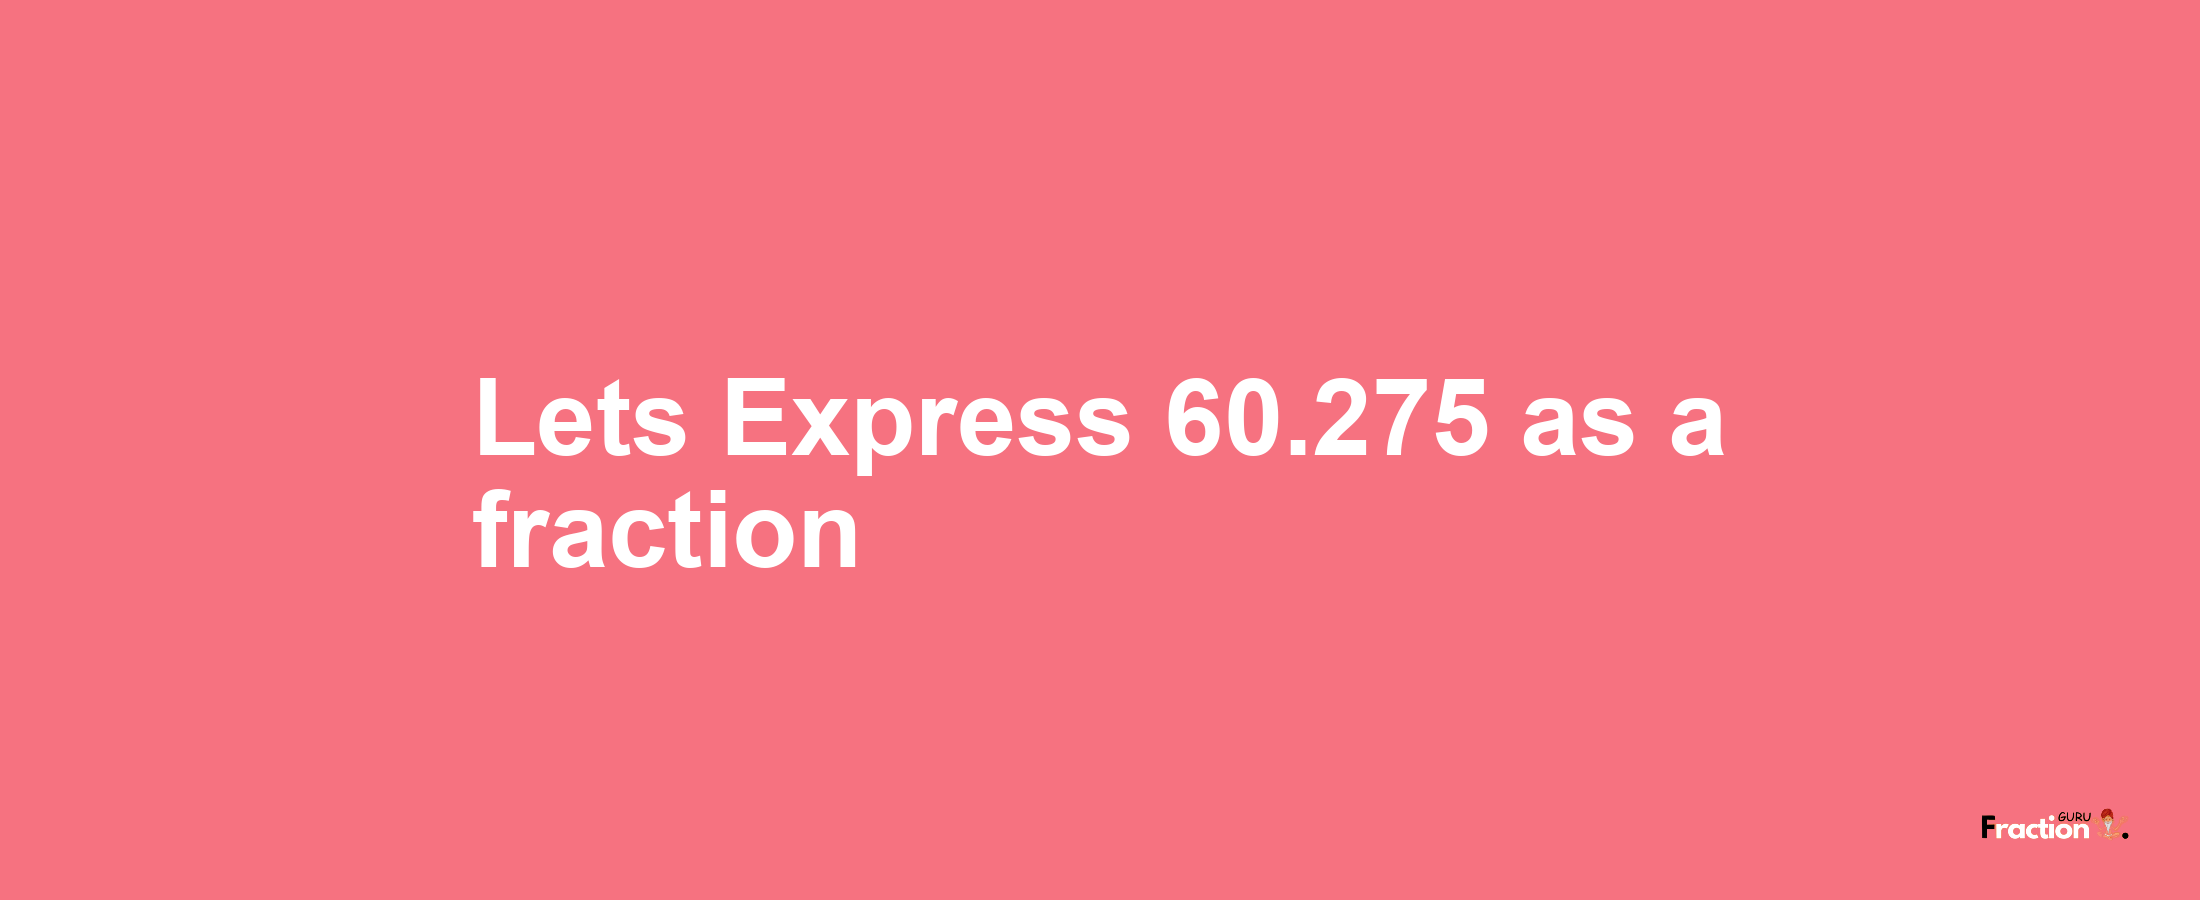 Lets Express 60.275 as afraction